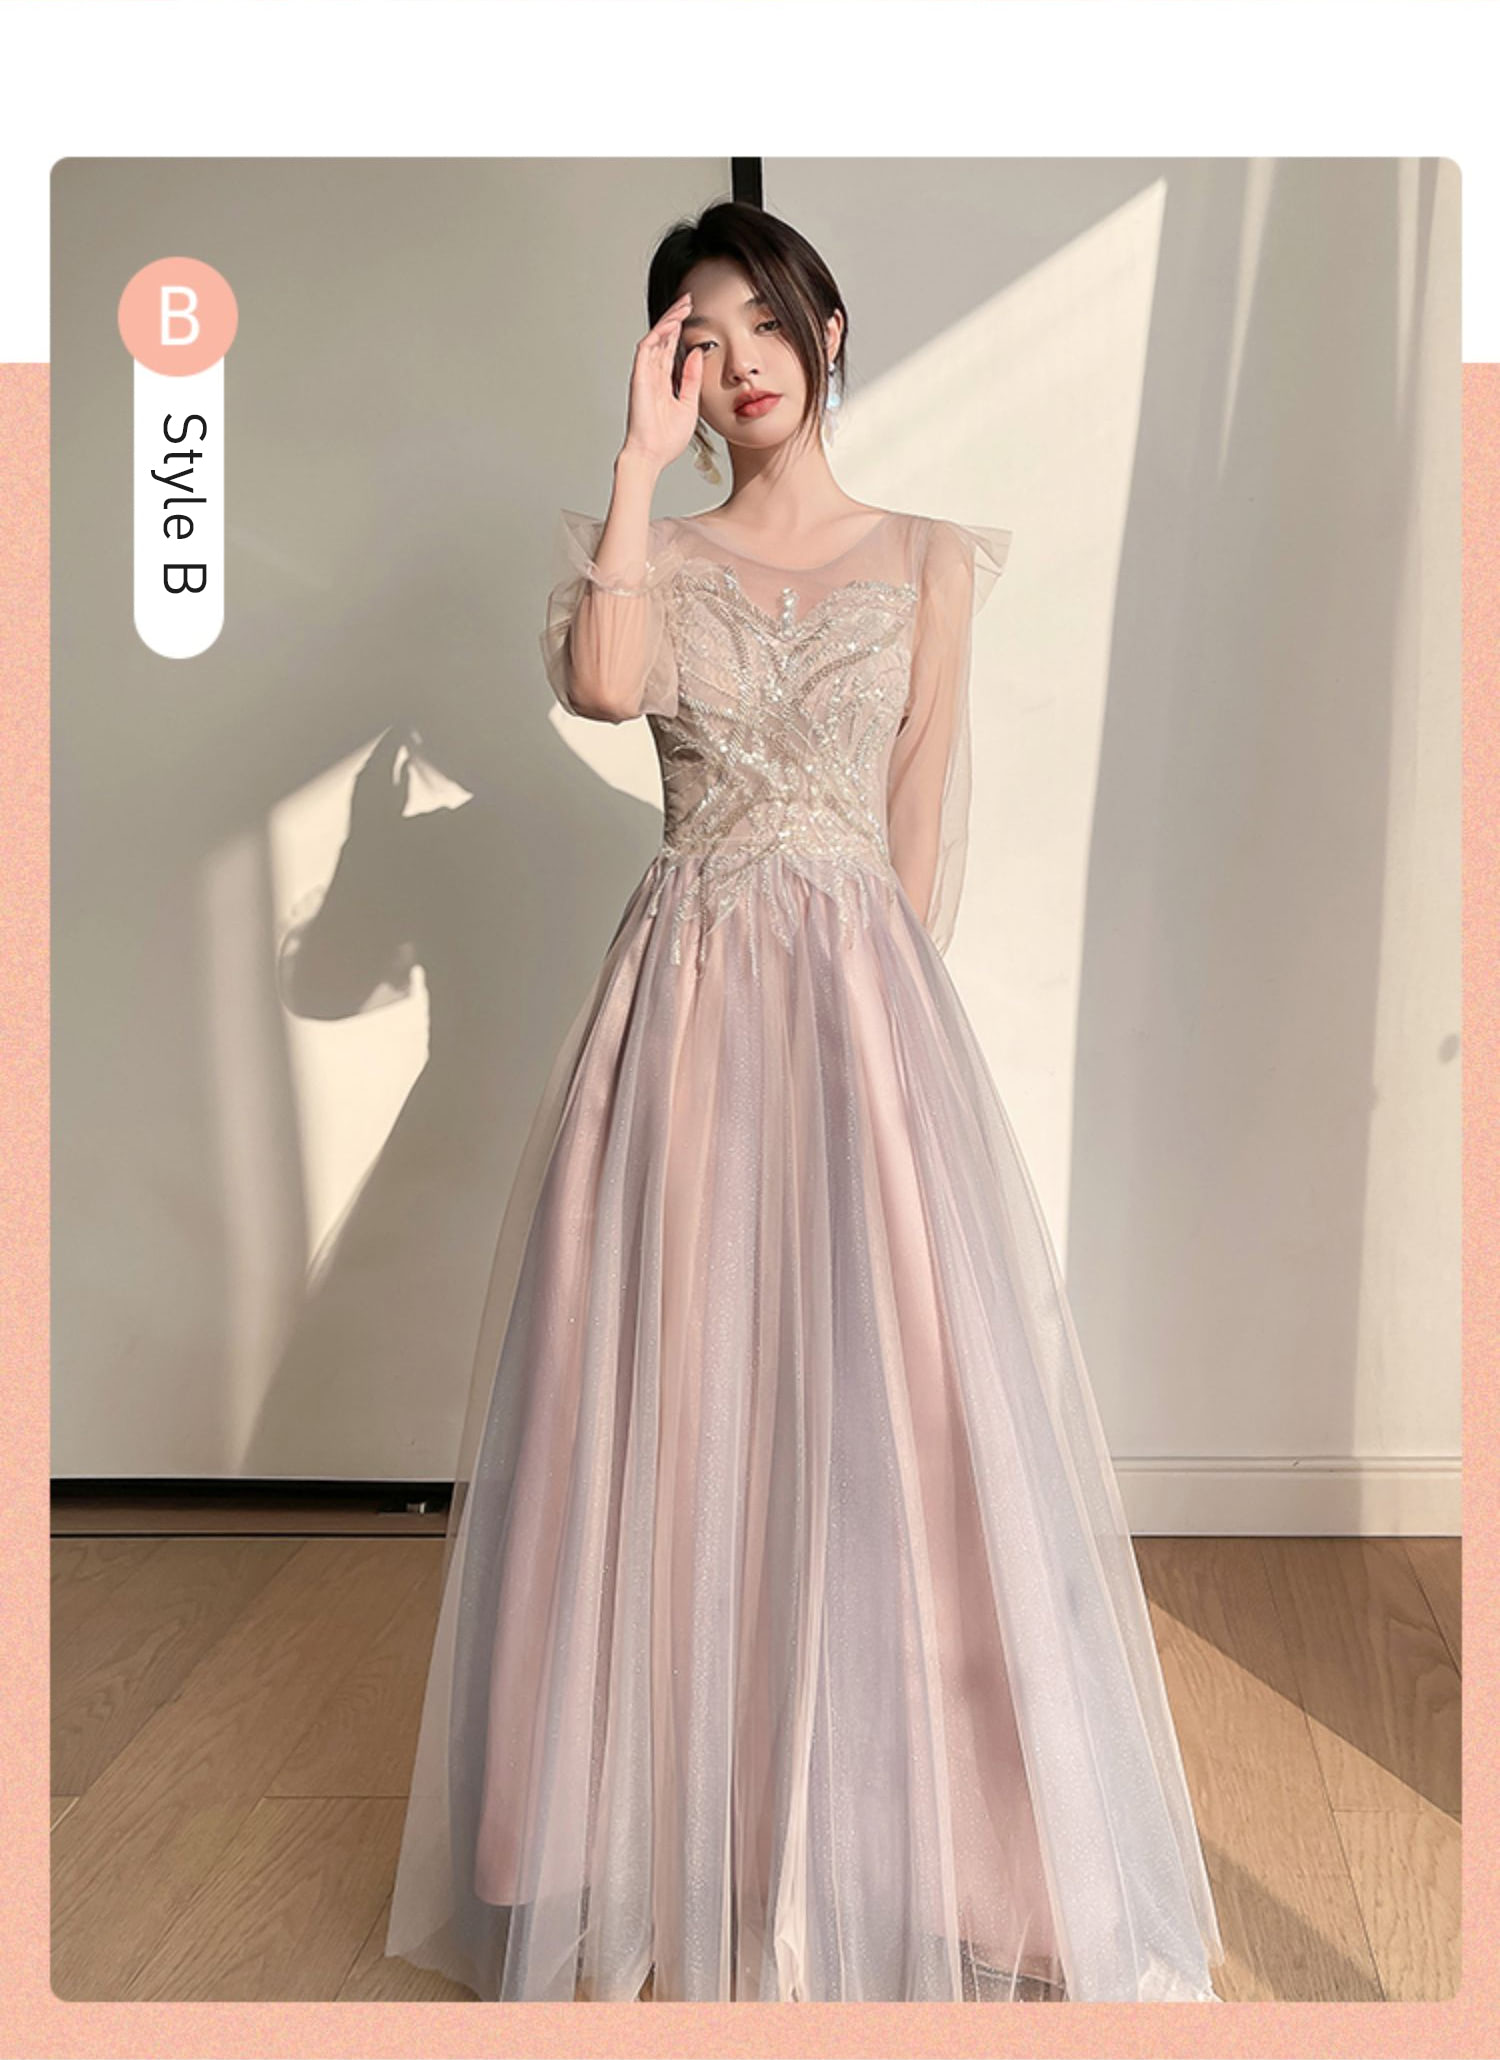 Elegant-Pale-Pink-Maxi-Bridesmaid-Dress-Long-Party-Ball-Gown17